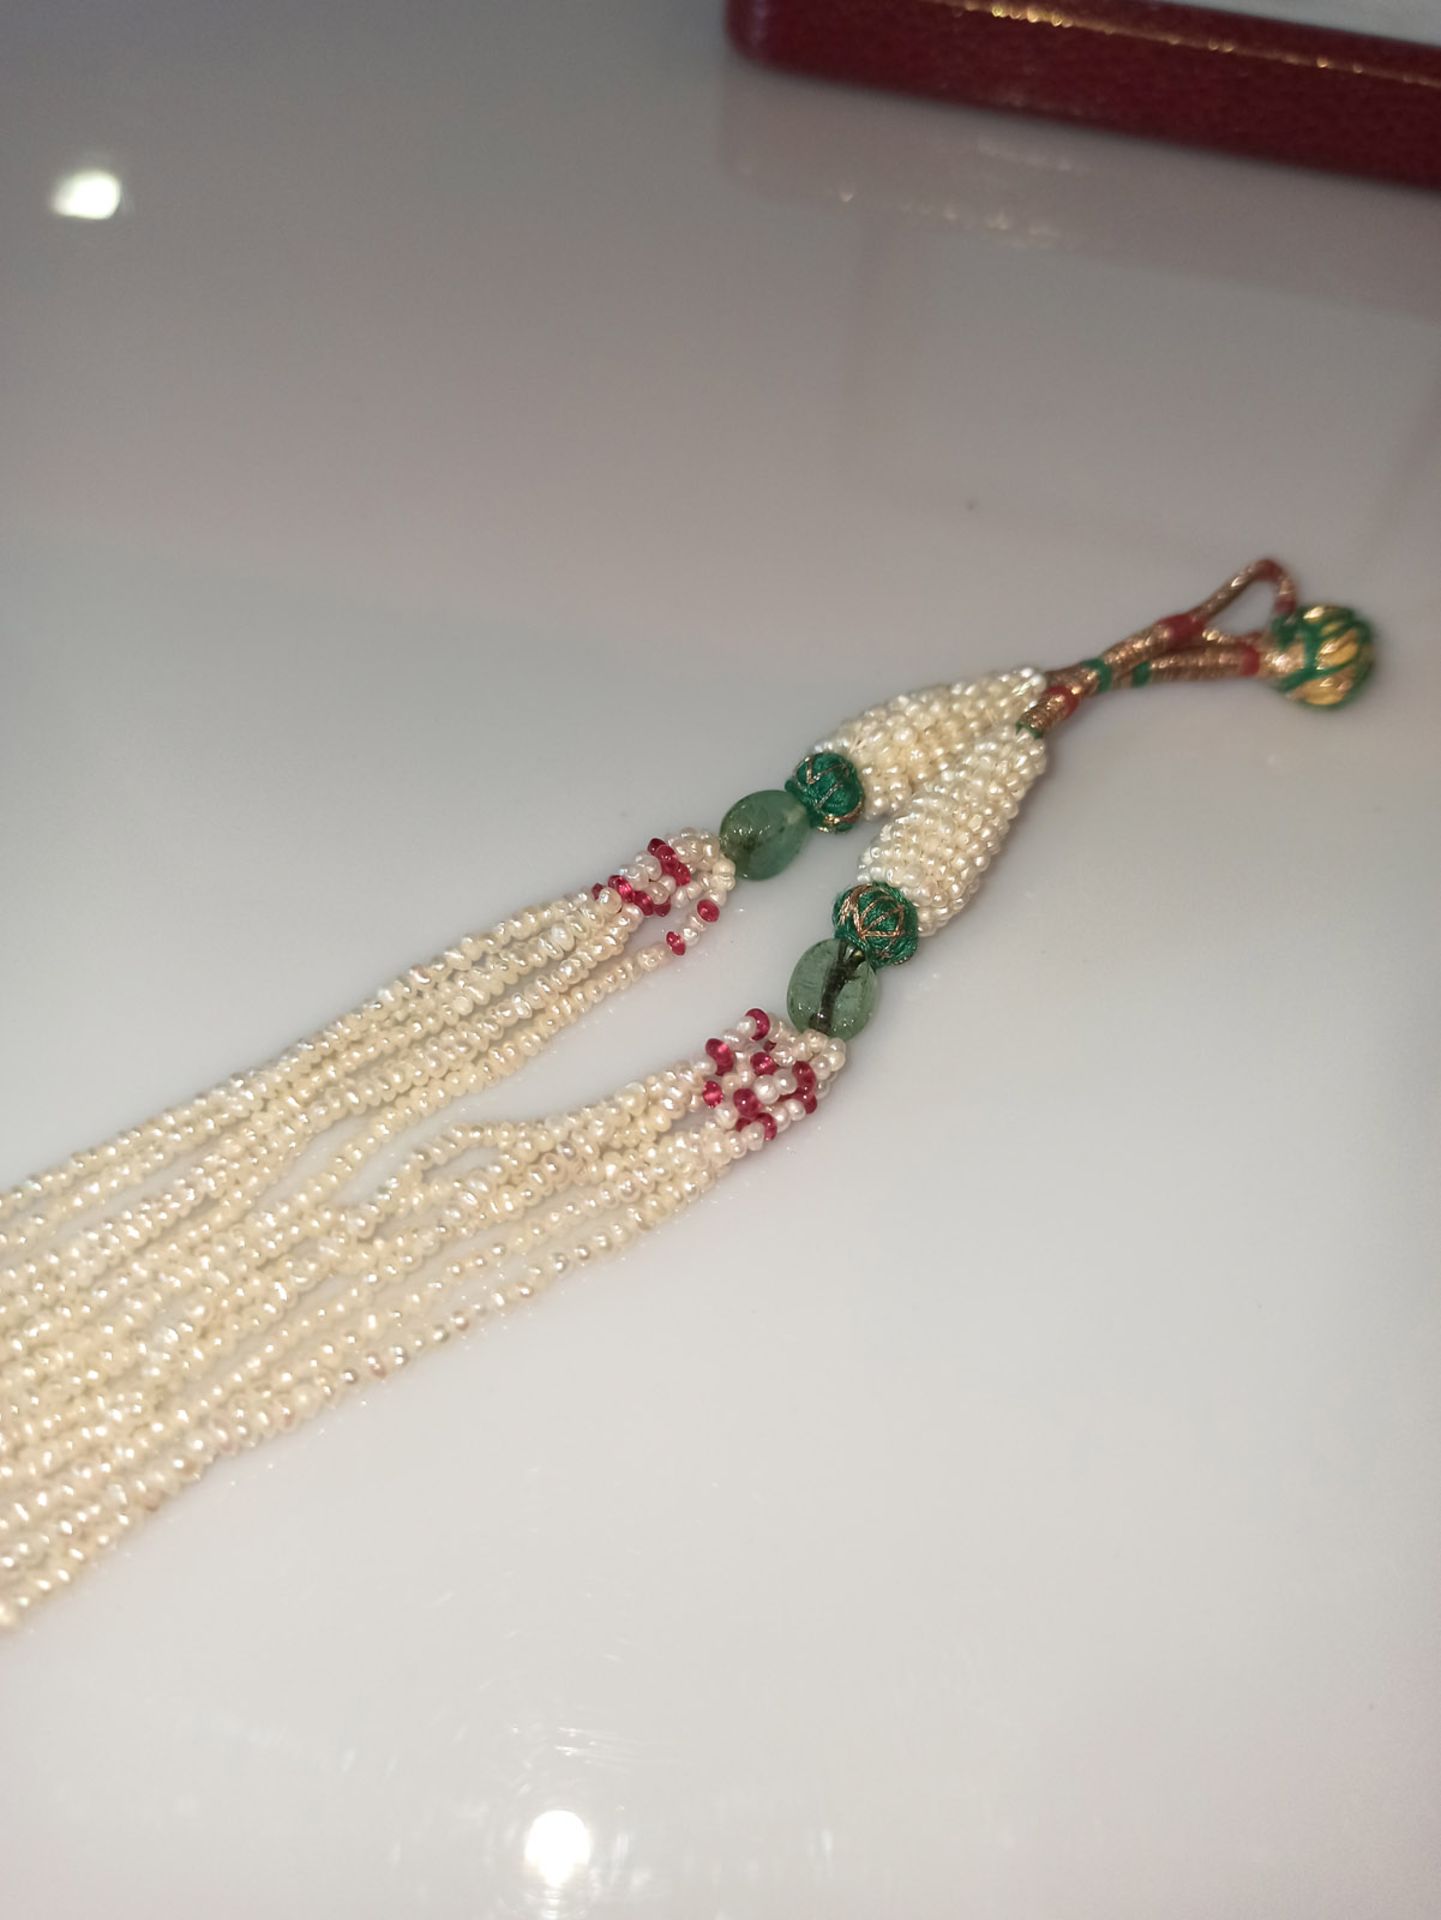 A PEARL NECKLACE WITH INLAID GOLD PENDANT IN MUGHAL STYLE - Image 5 of 5